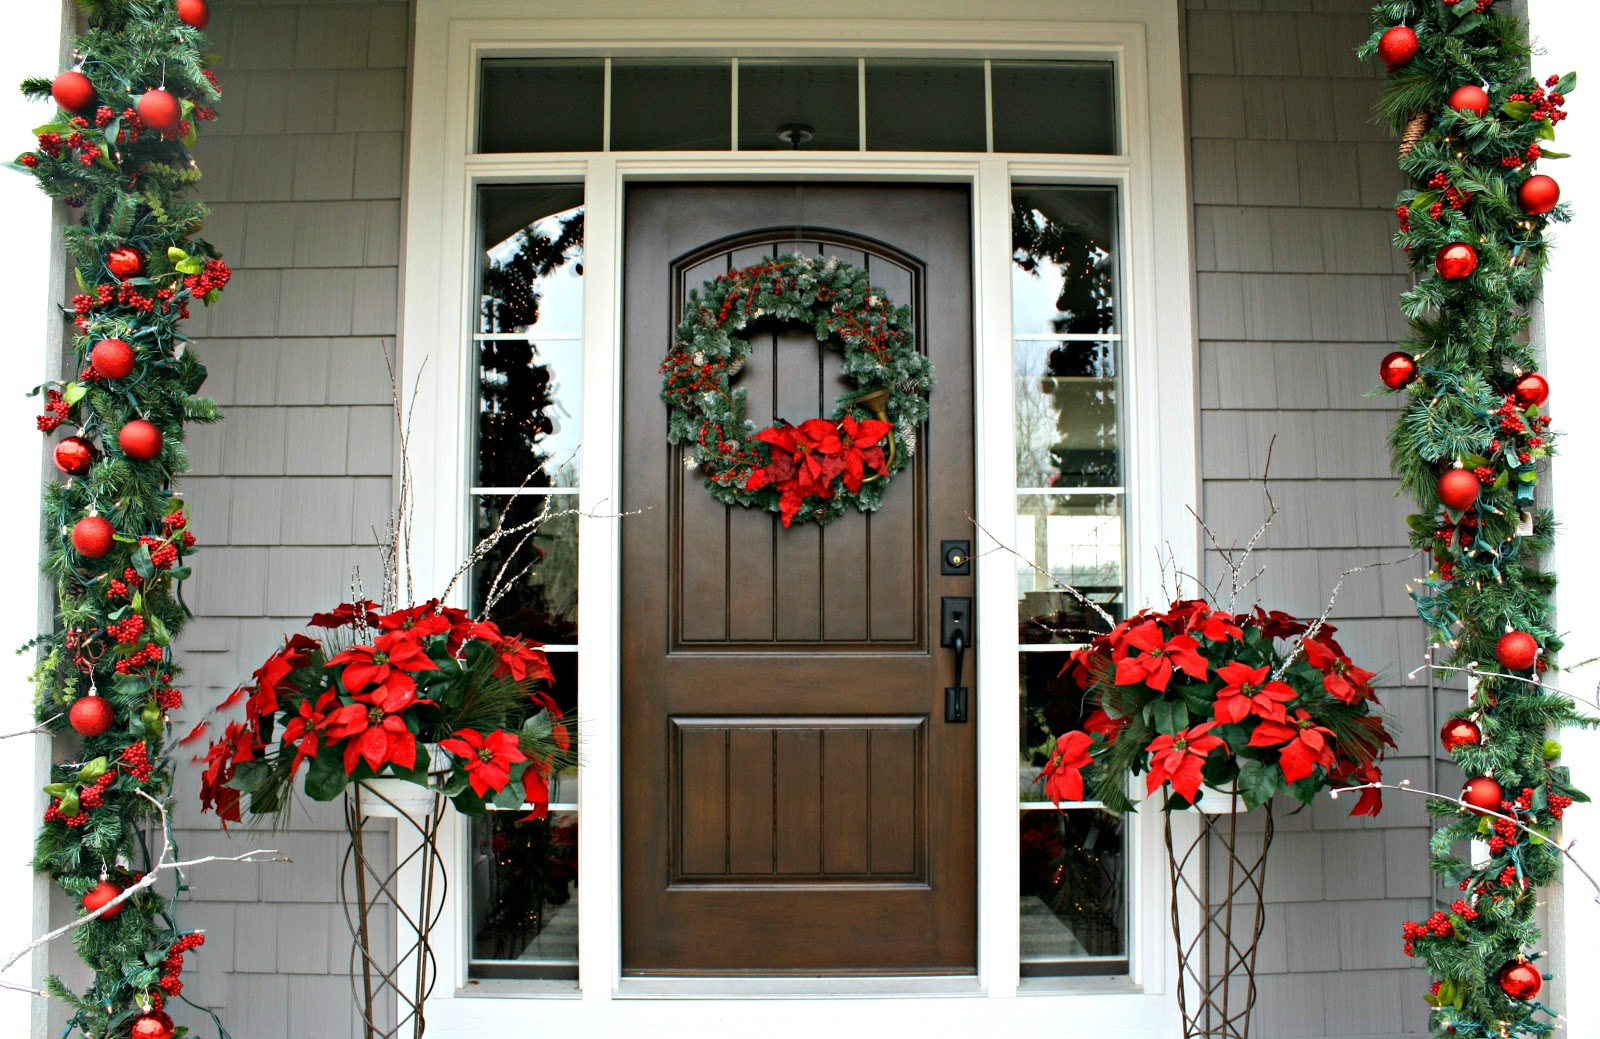 Decorating front doors is important because it is the first then visitors experience. This is the first thing they'll see and first impressions last.